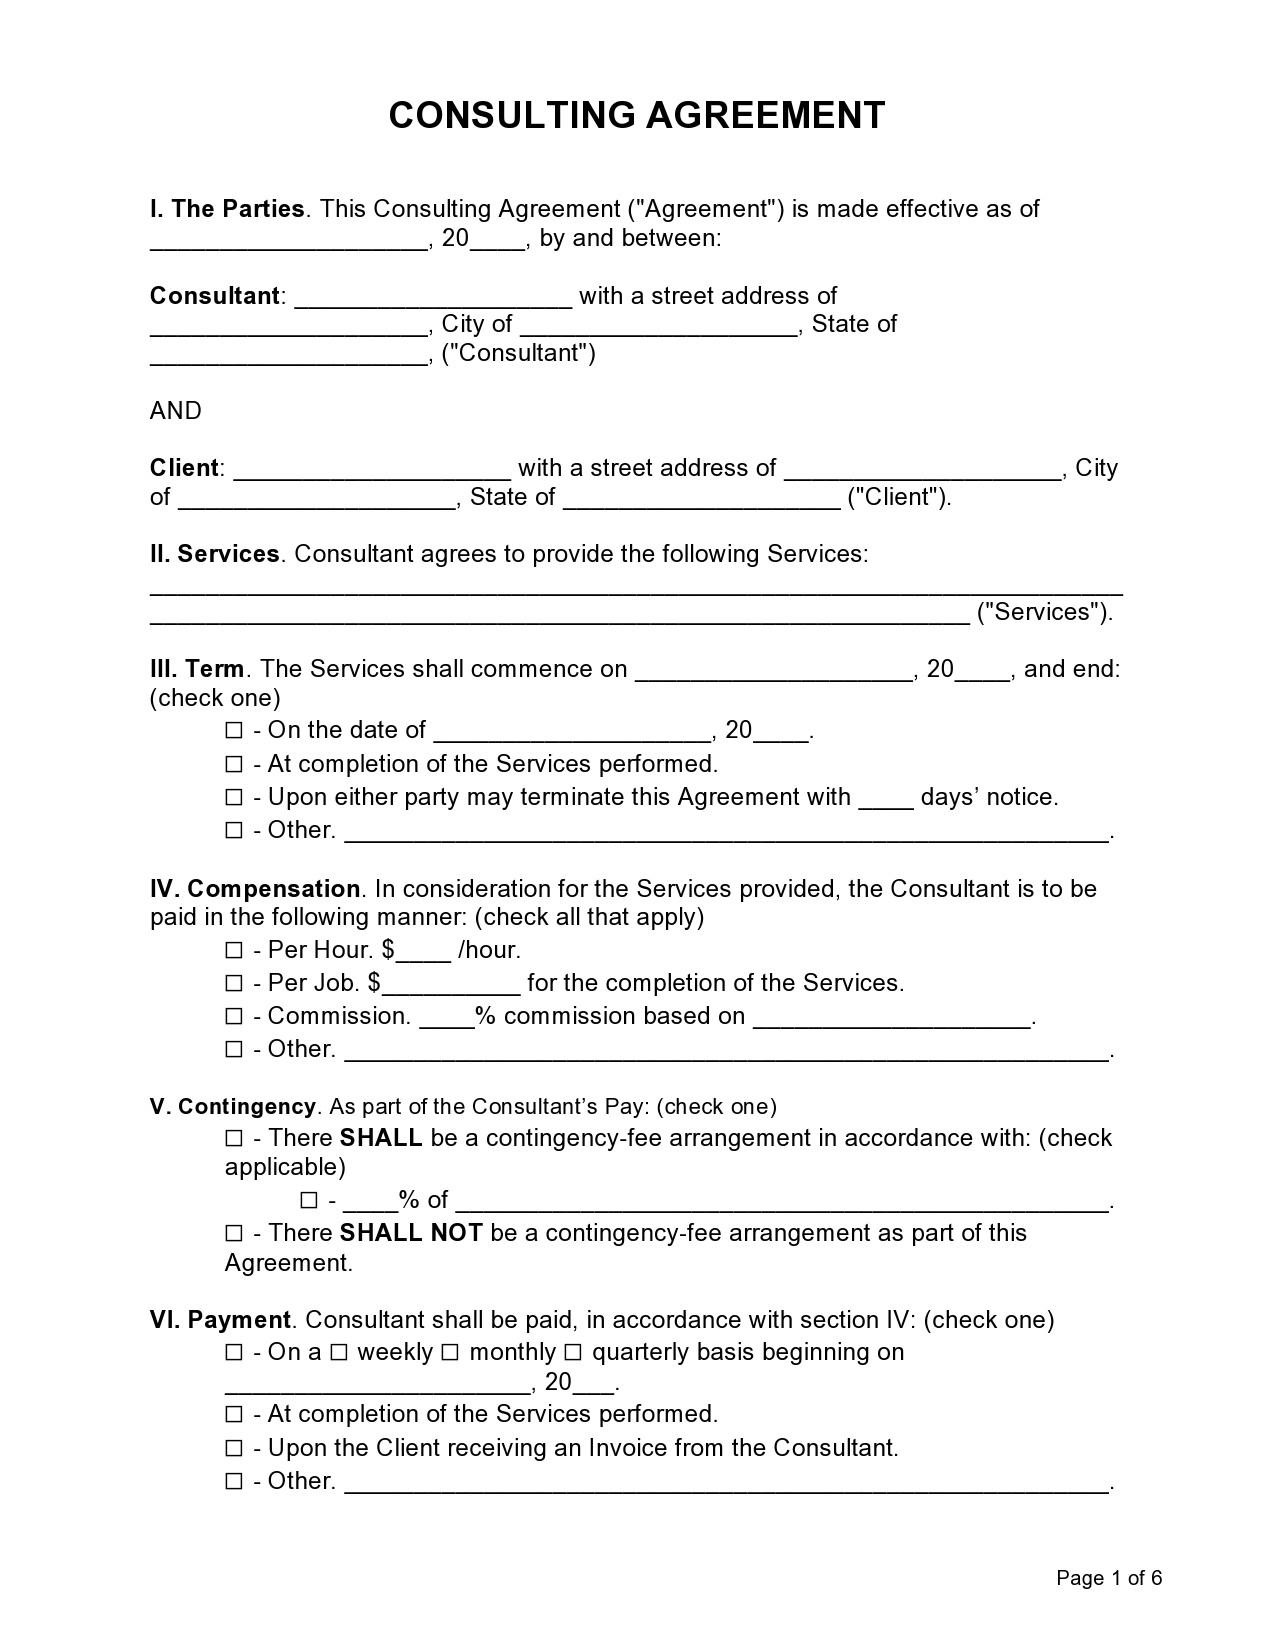 Free consulting contract template 21